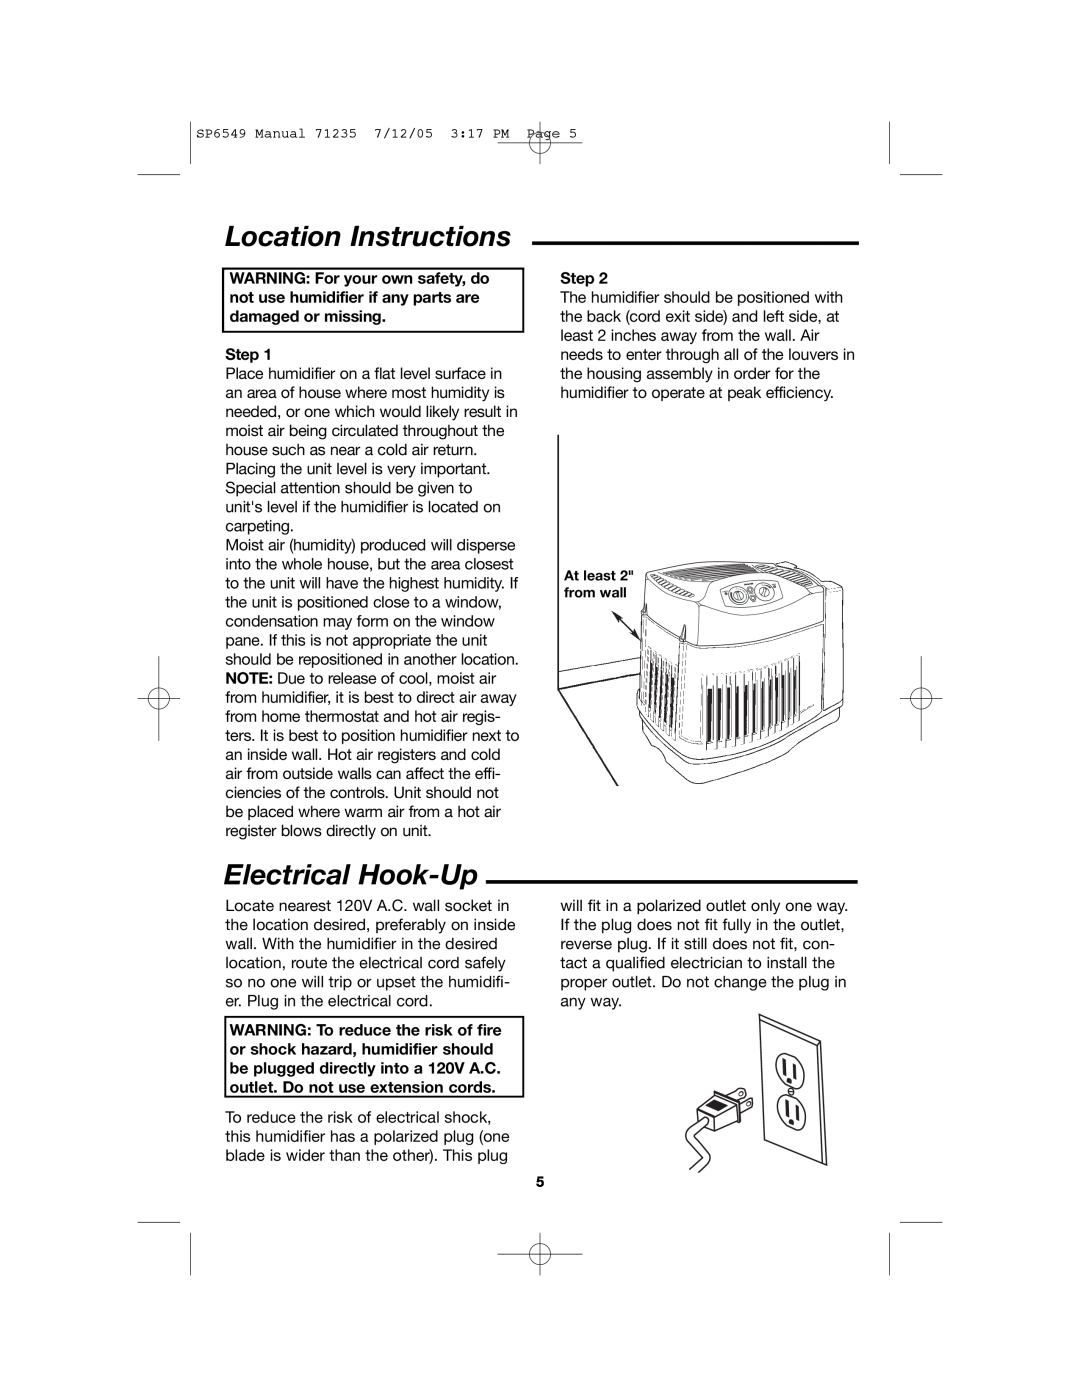 MoistAir MA 0950 owner manual Location Instructions, Electrical Hook-Up, Step 